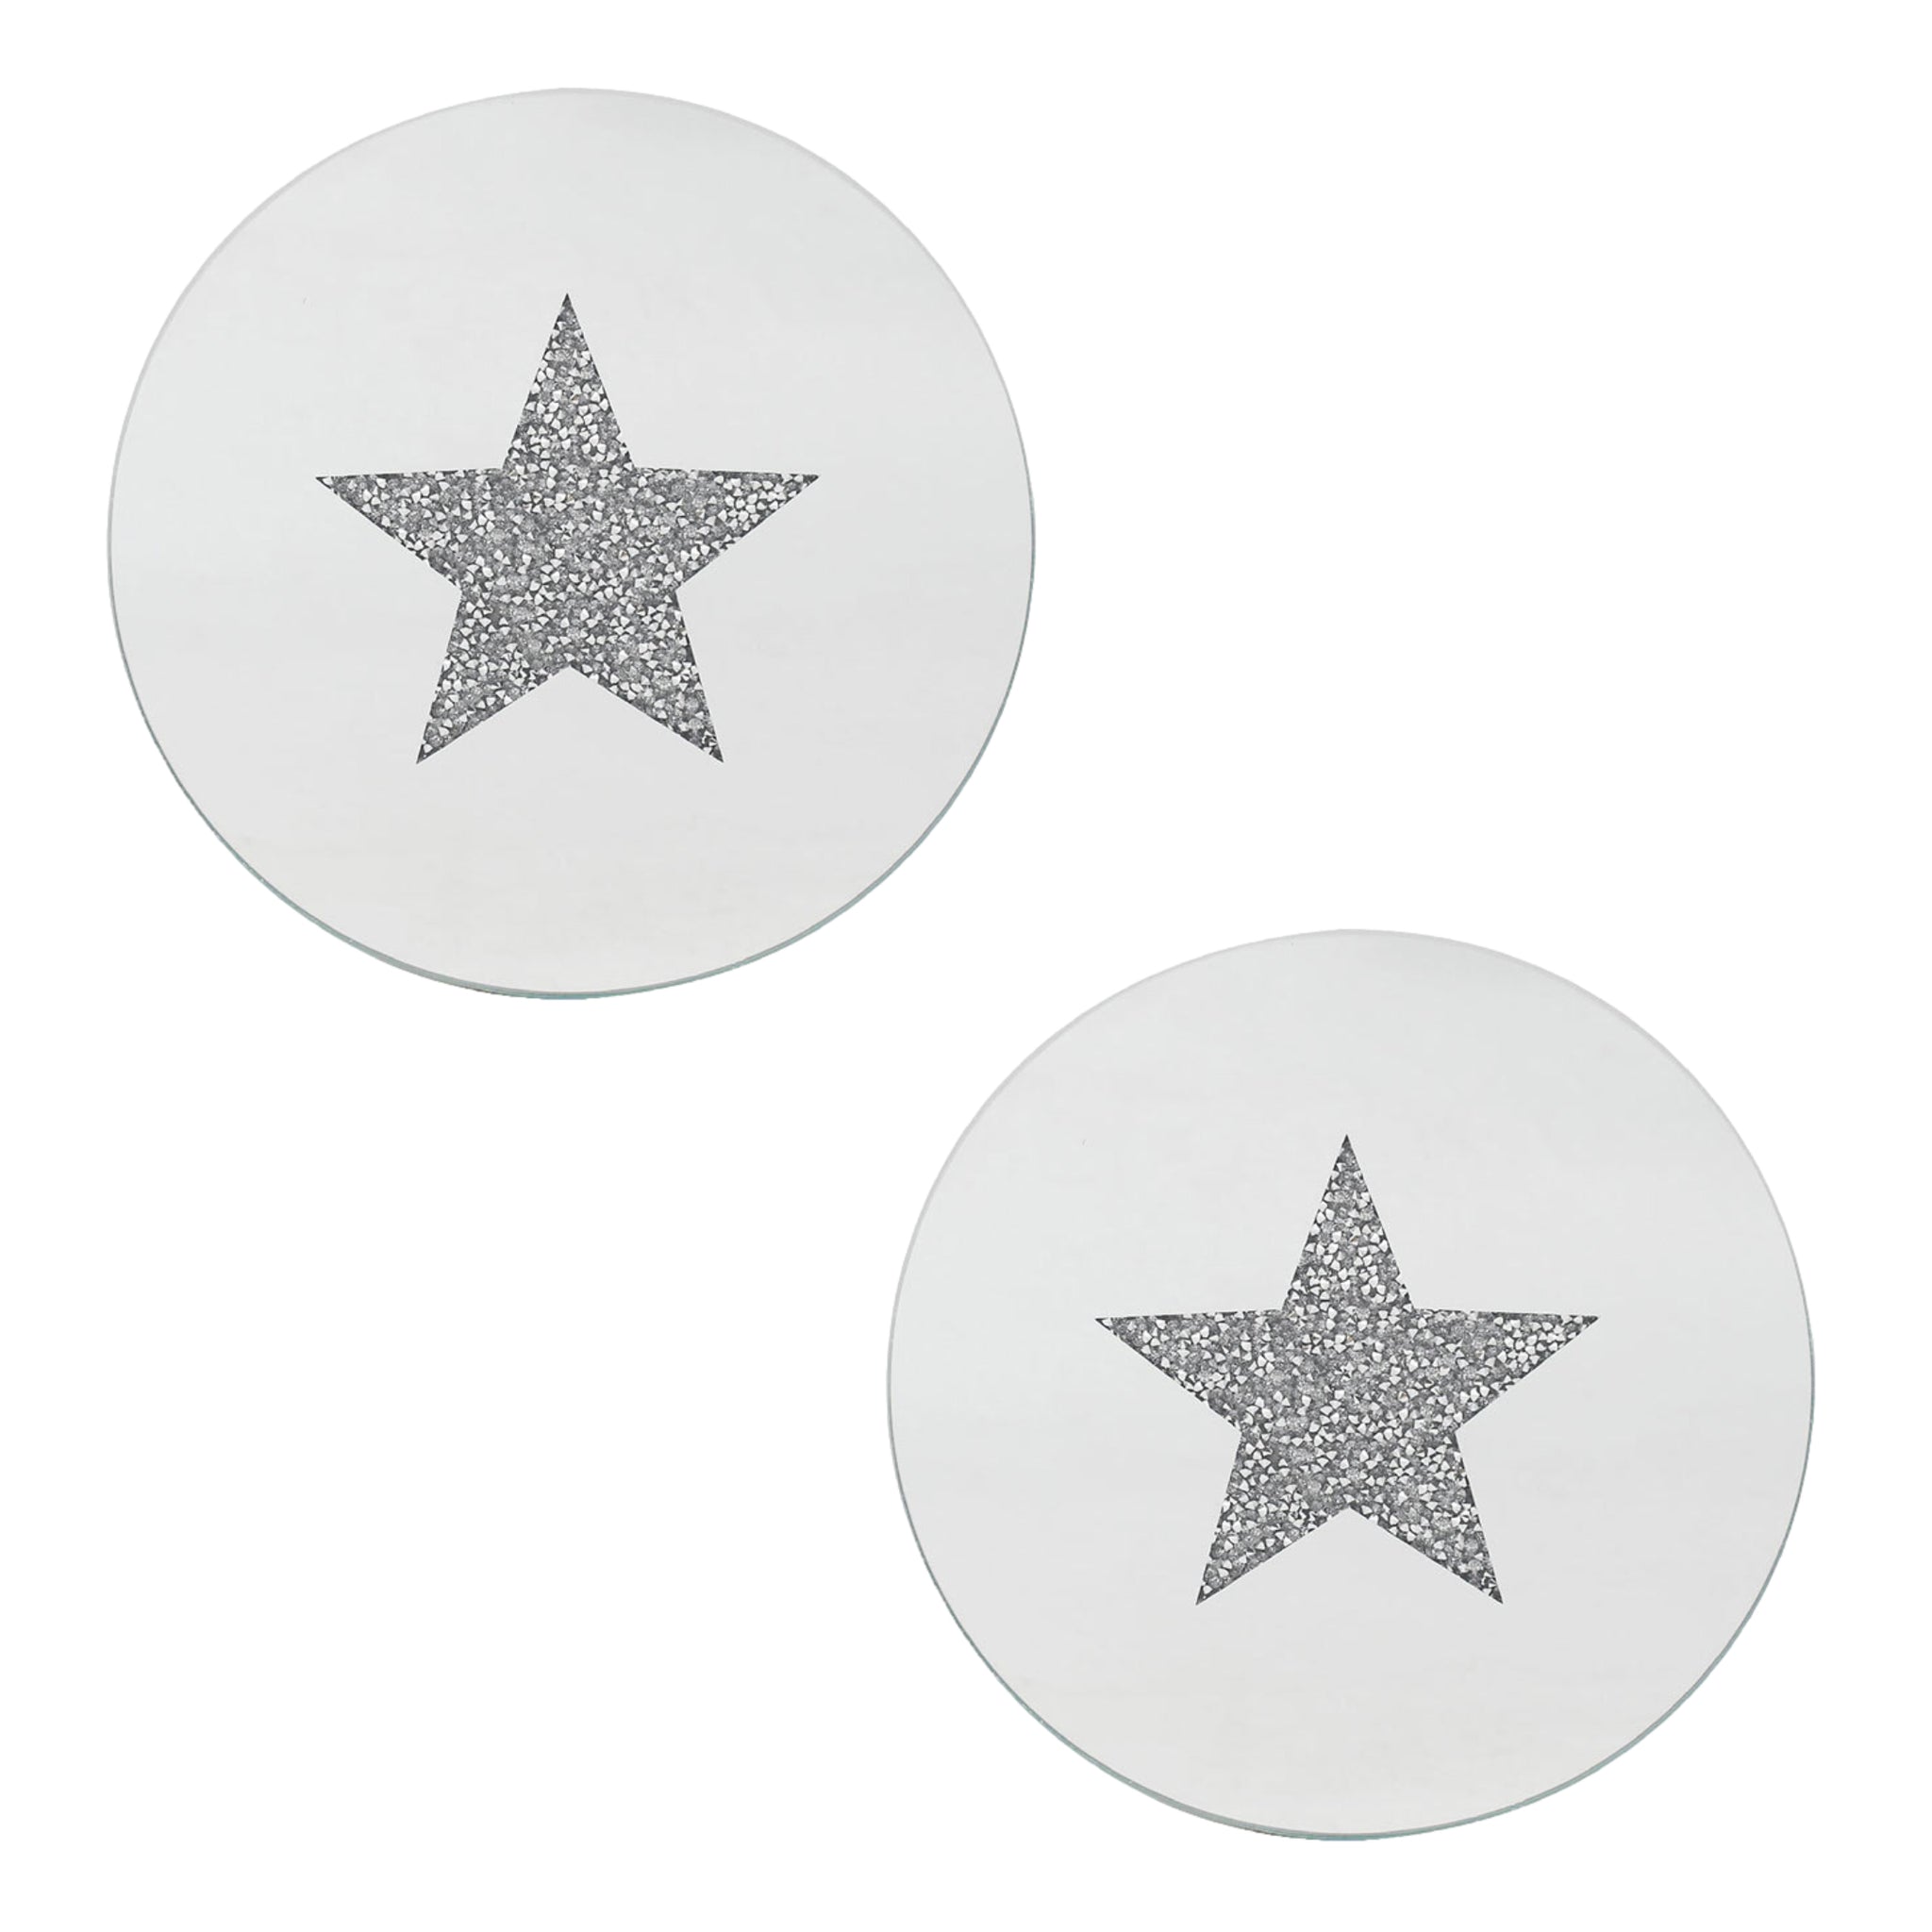 Set of 2 15.5cm Diamante Crystal Star Mirrored Glass Candle Plate